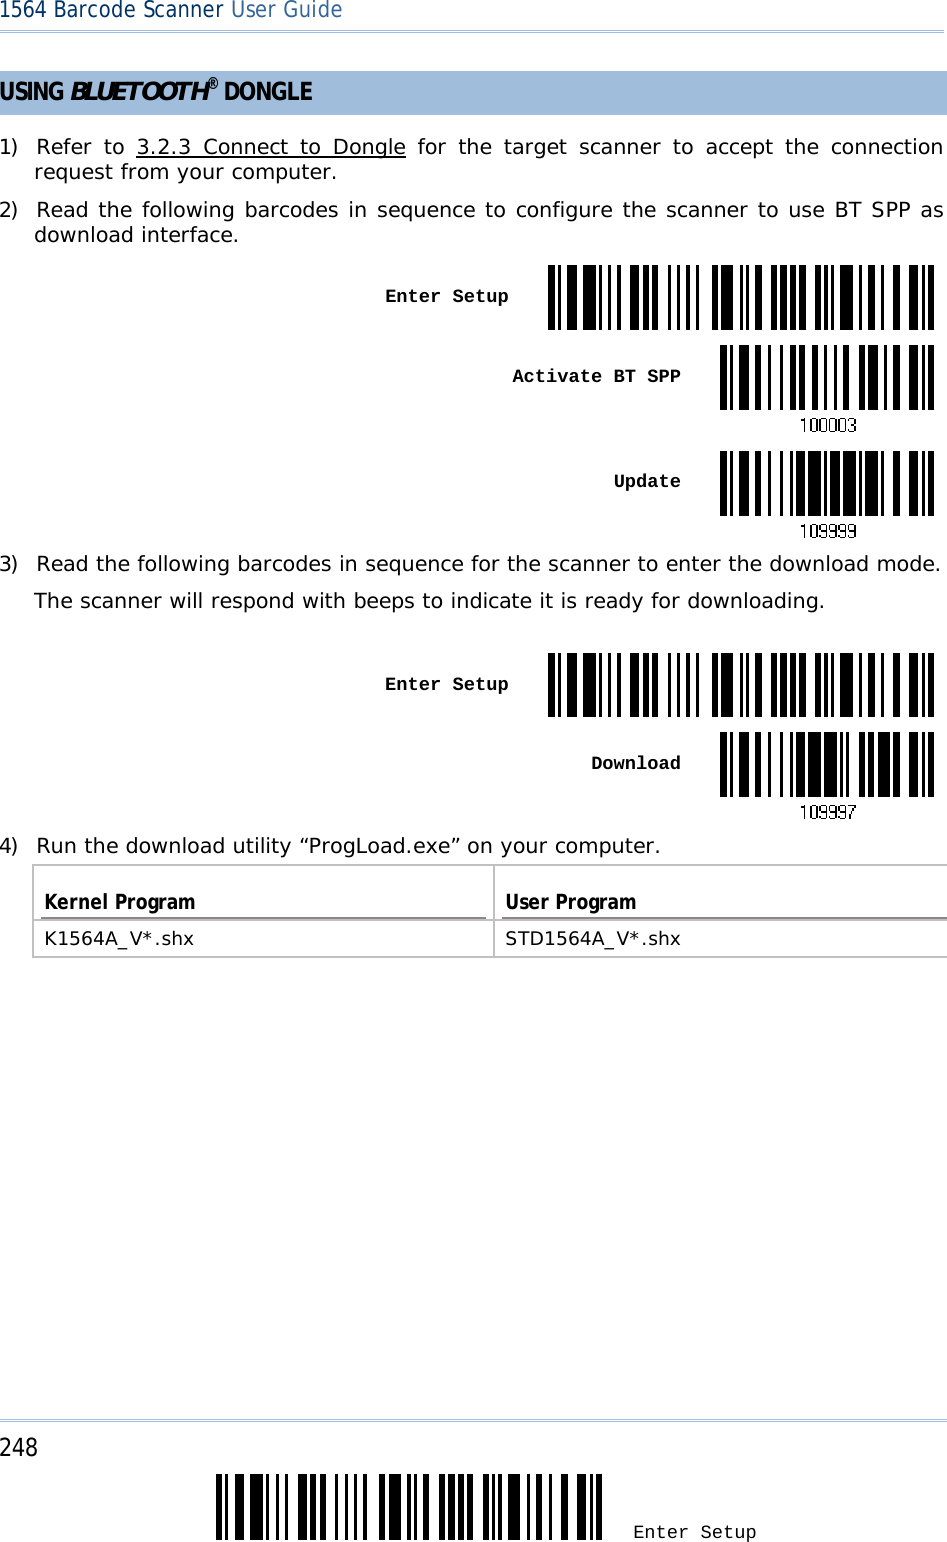 248 Enter Setup 1564 Barcode Scanner User Guide  USING BLUETOOTH® DONGLE 1) Refer to 3.2.3 Connect to Dongle for the target scanner to accept the connection request from your computer. 2) Read the following barcodes in sequence to configure the scanner to use BT SPP as download interface.  Enter Setup Activate BT SPP Update3) Read the following barcodes in sequence for the scanner to enter the download mode.  The scanner will respond with beeps to indicate it is ready for downloading.   Enter Setup Download4) Run the download utility “ProgLoad.exe” on your computer.  Kernel Program  User Program K1564A_V*.shx STD1564A_V*.shx  